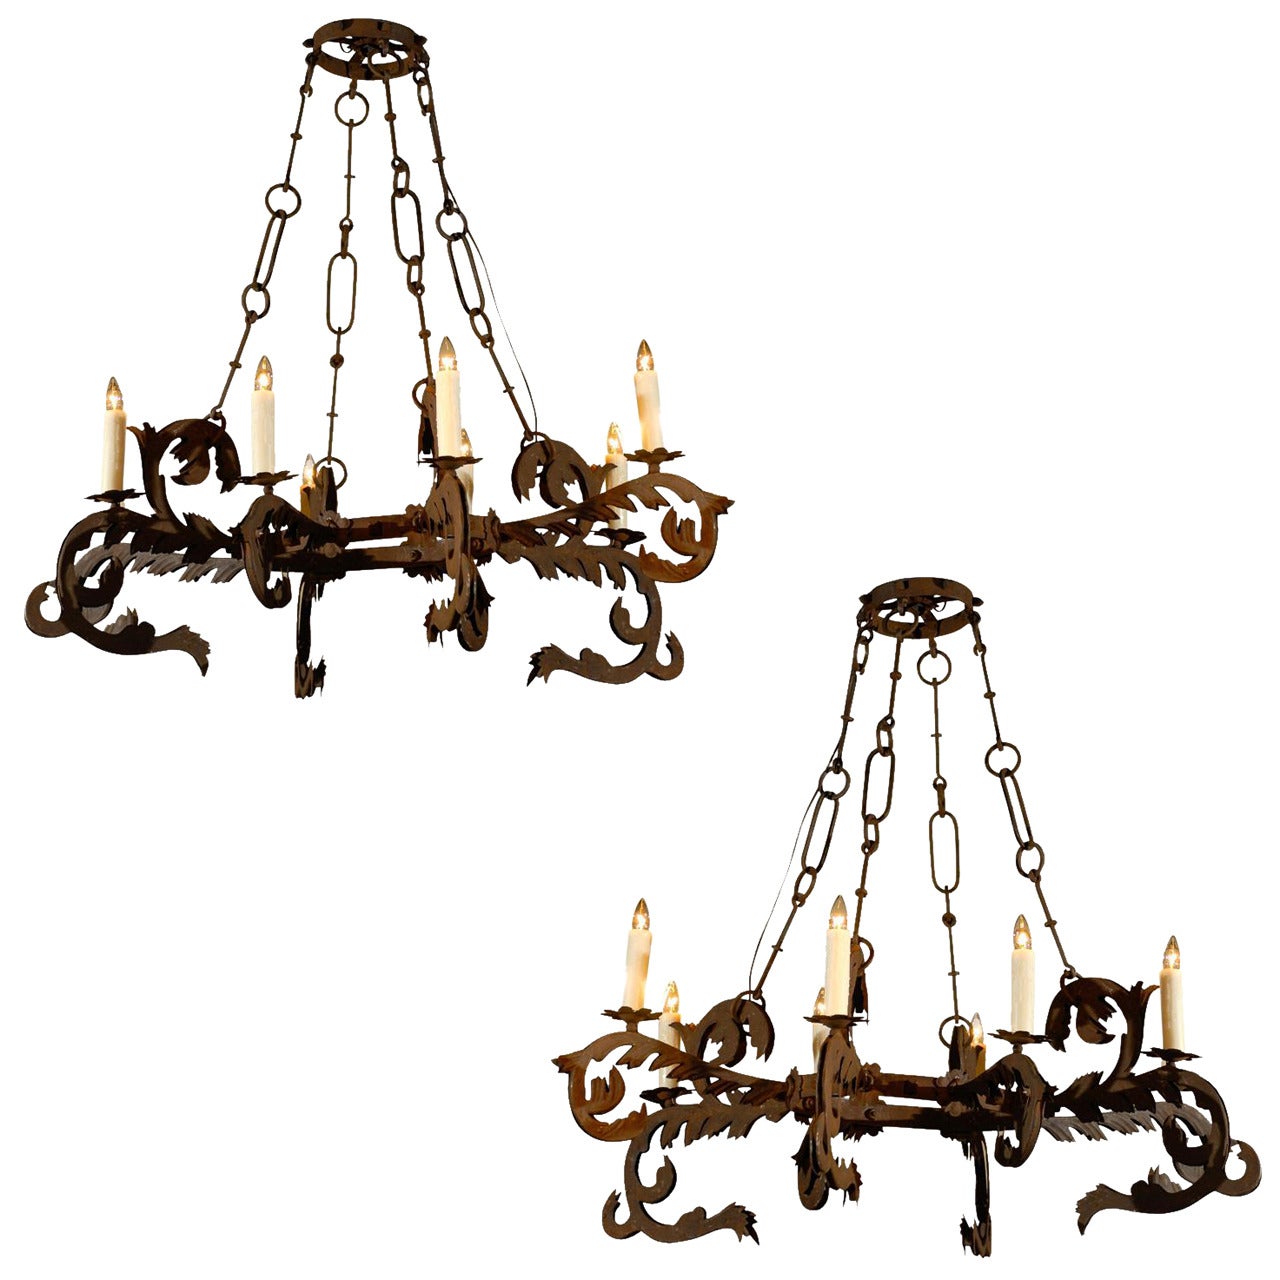 Pair of Florentine 1720s Gothic Revival Eight-Light Wrought Iron Chandeliers